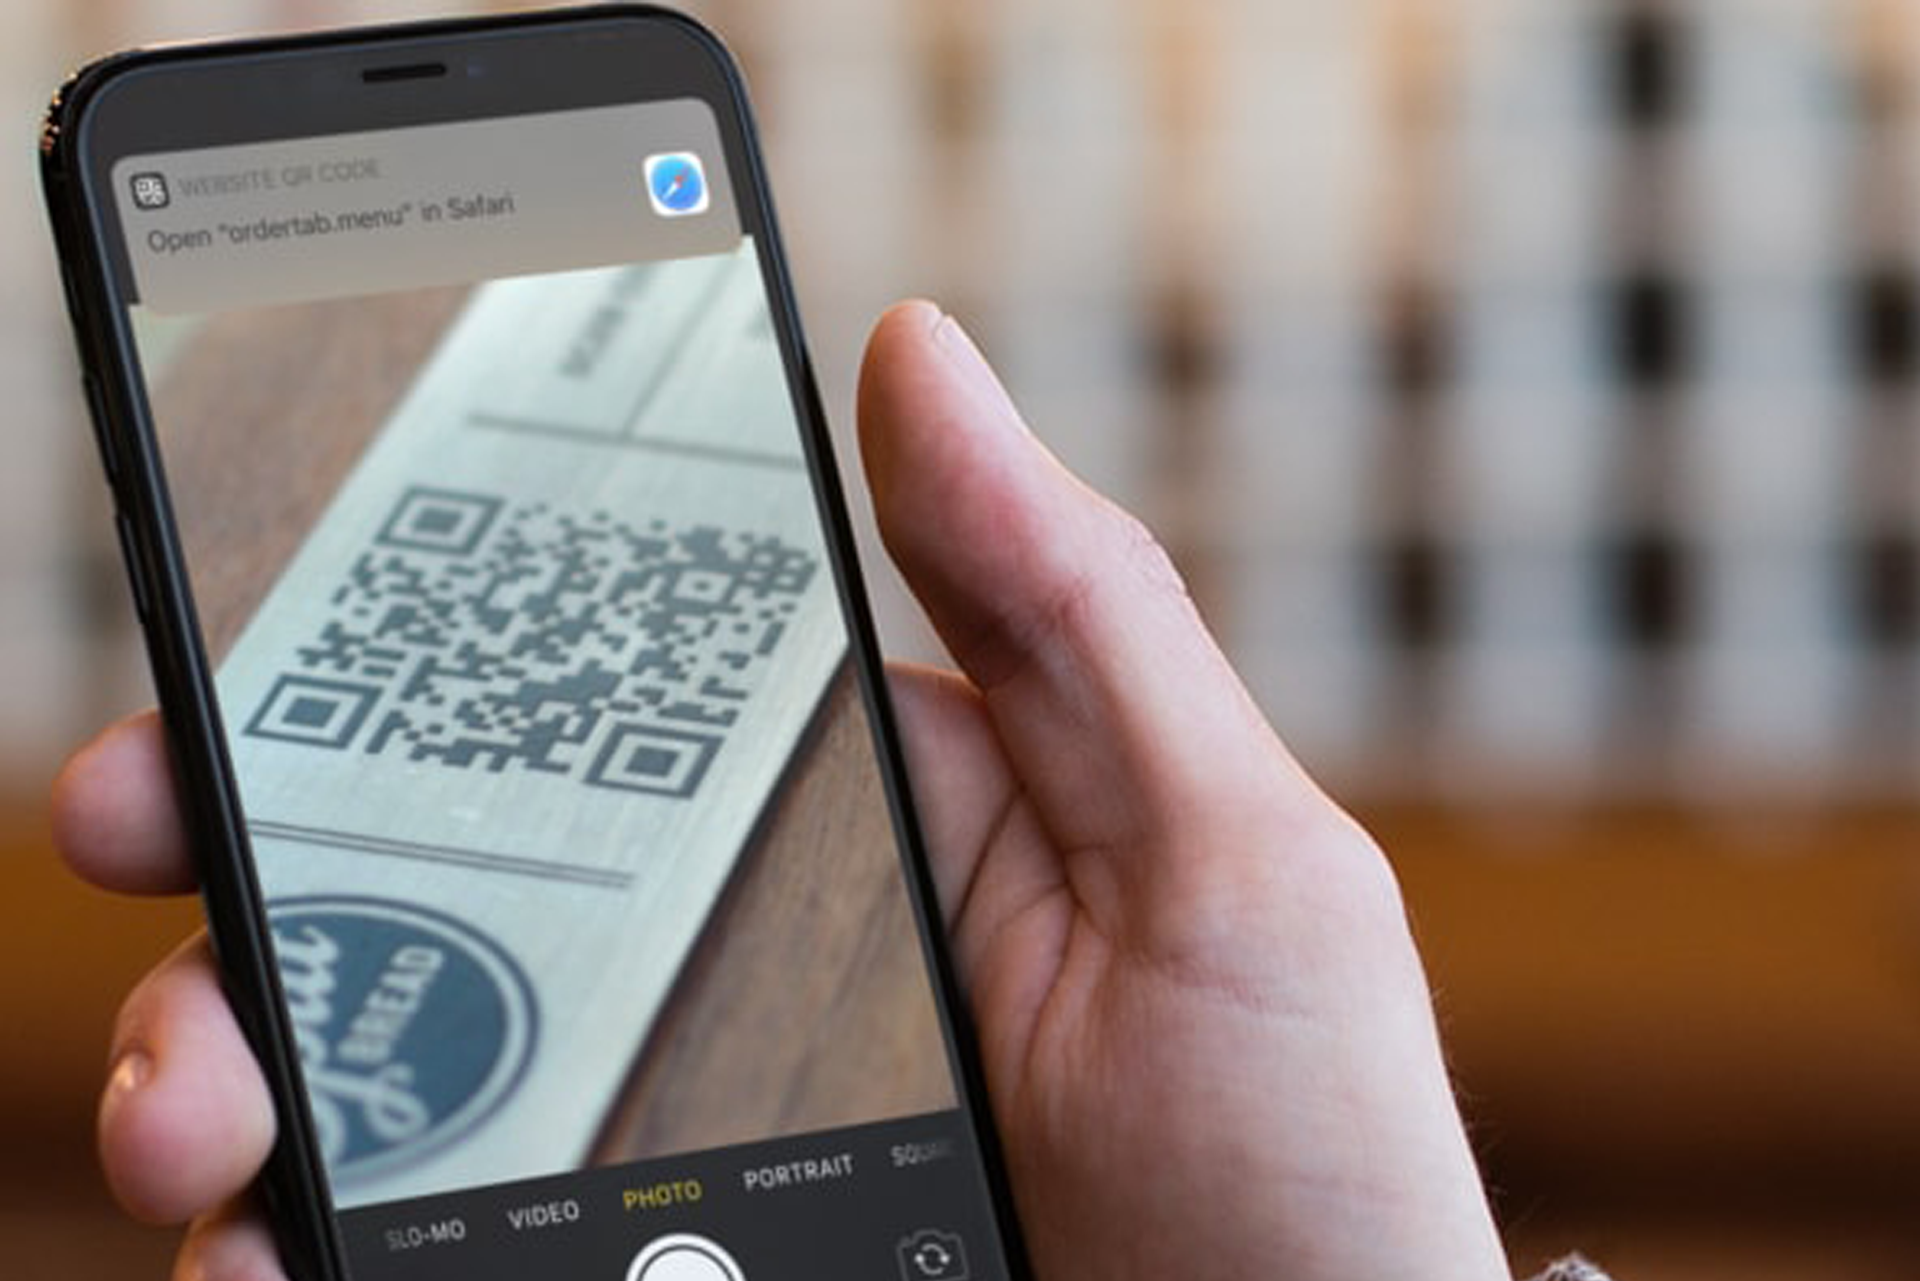 Scan QR code for menu on mobile